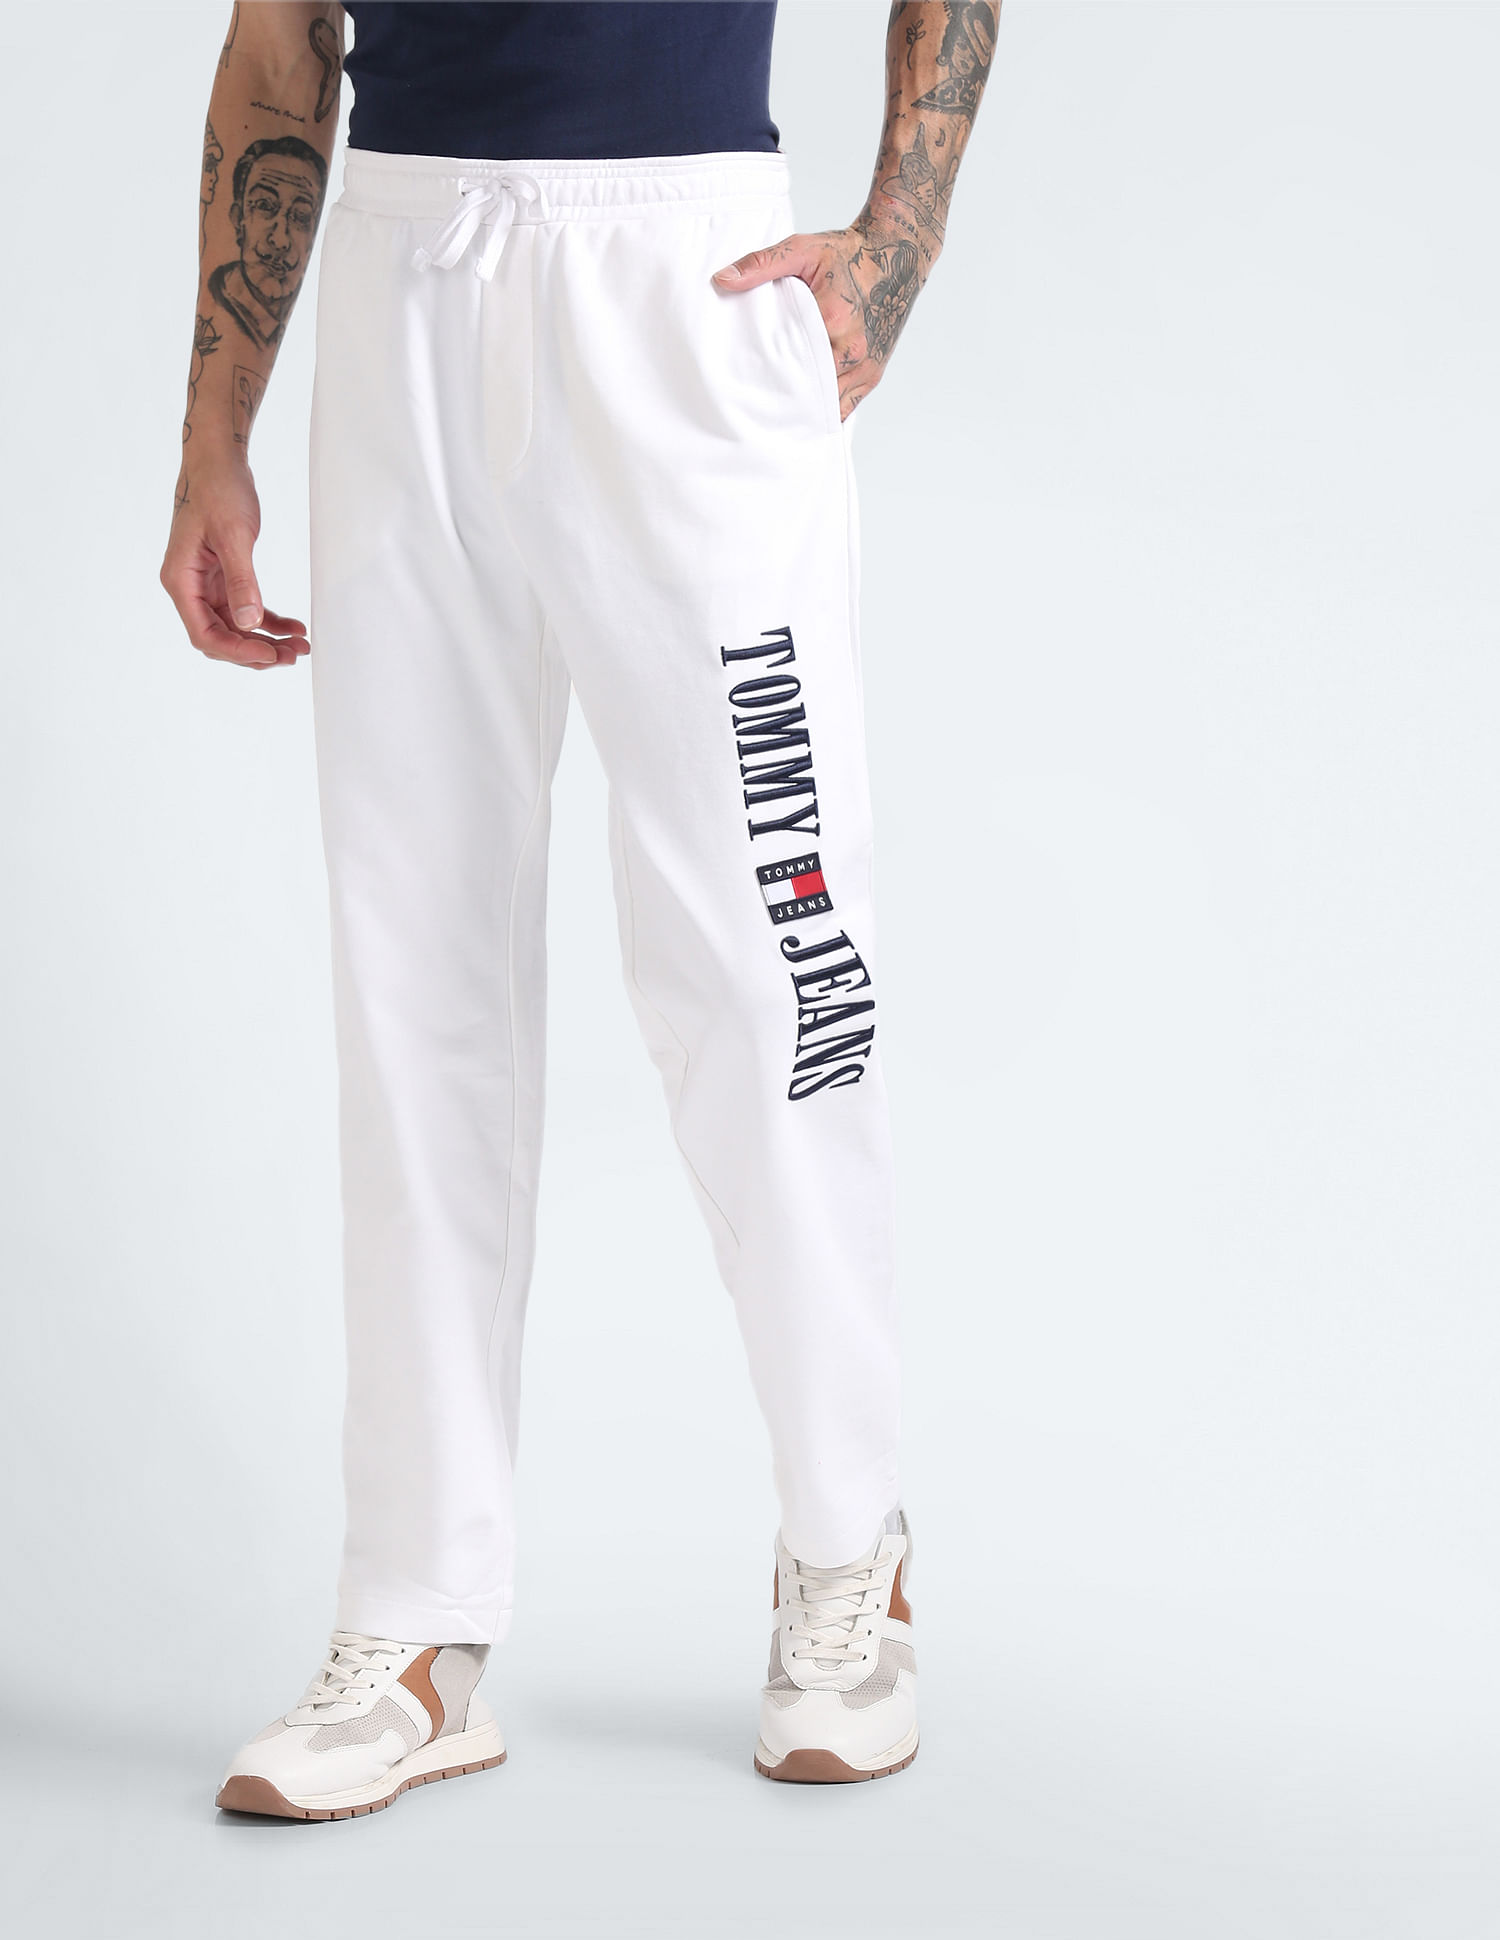 Buy Tommy Hilfiger Sustainable Relaxed Fit Joggers - NNNOW.com